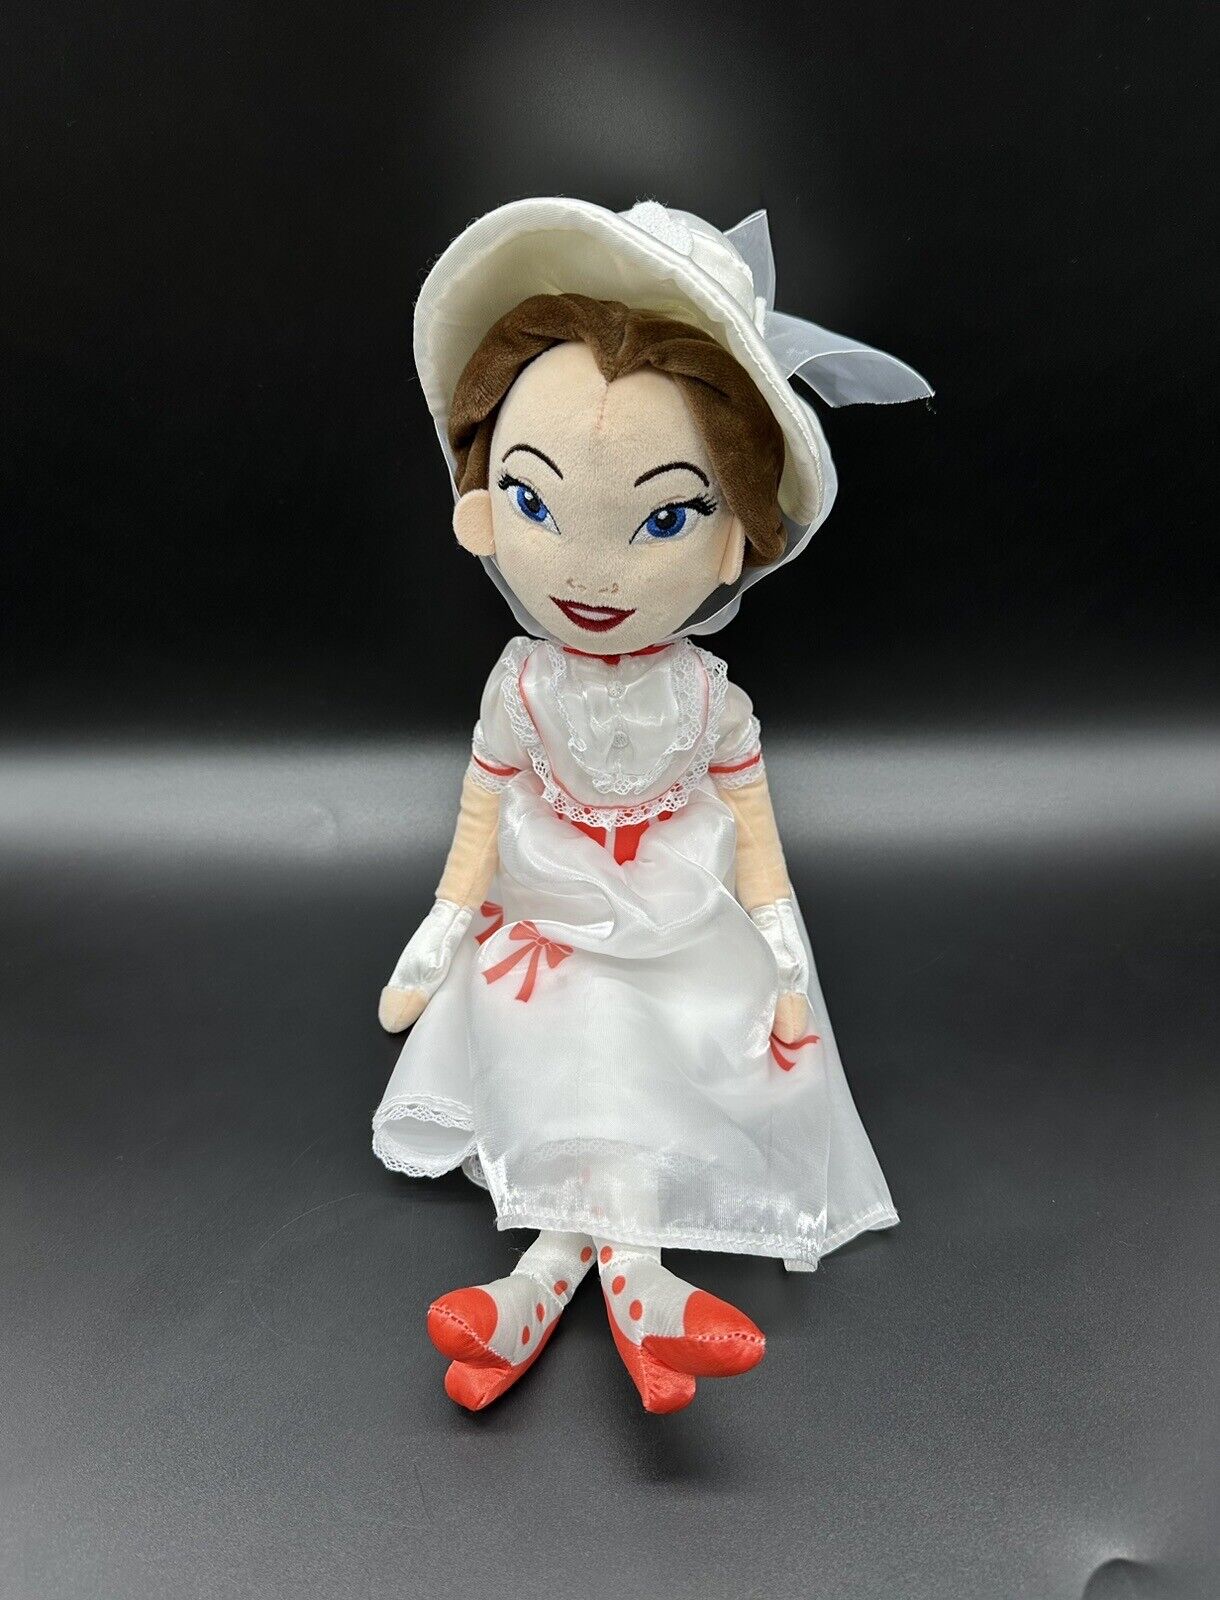 Mary Poppins Doll Stuffed Plush Red White Dress Jolly Holiday Disney Store 18 In